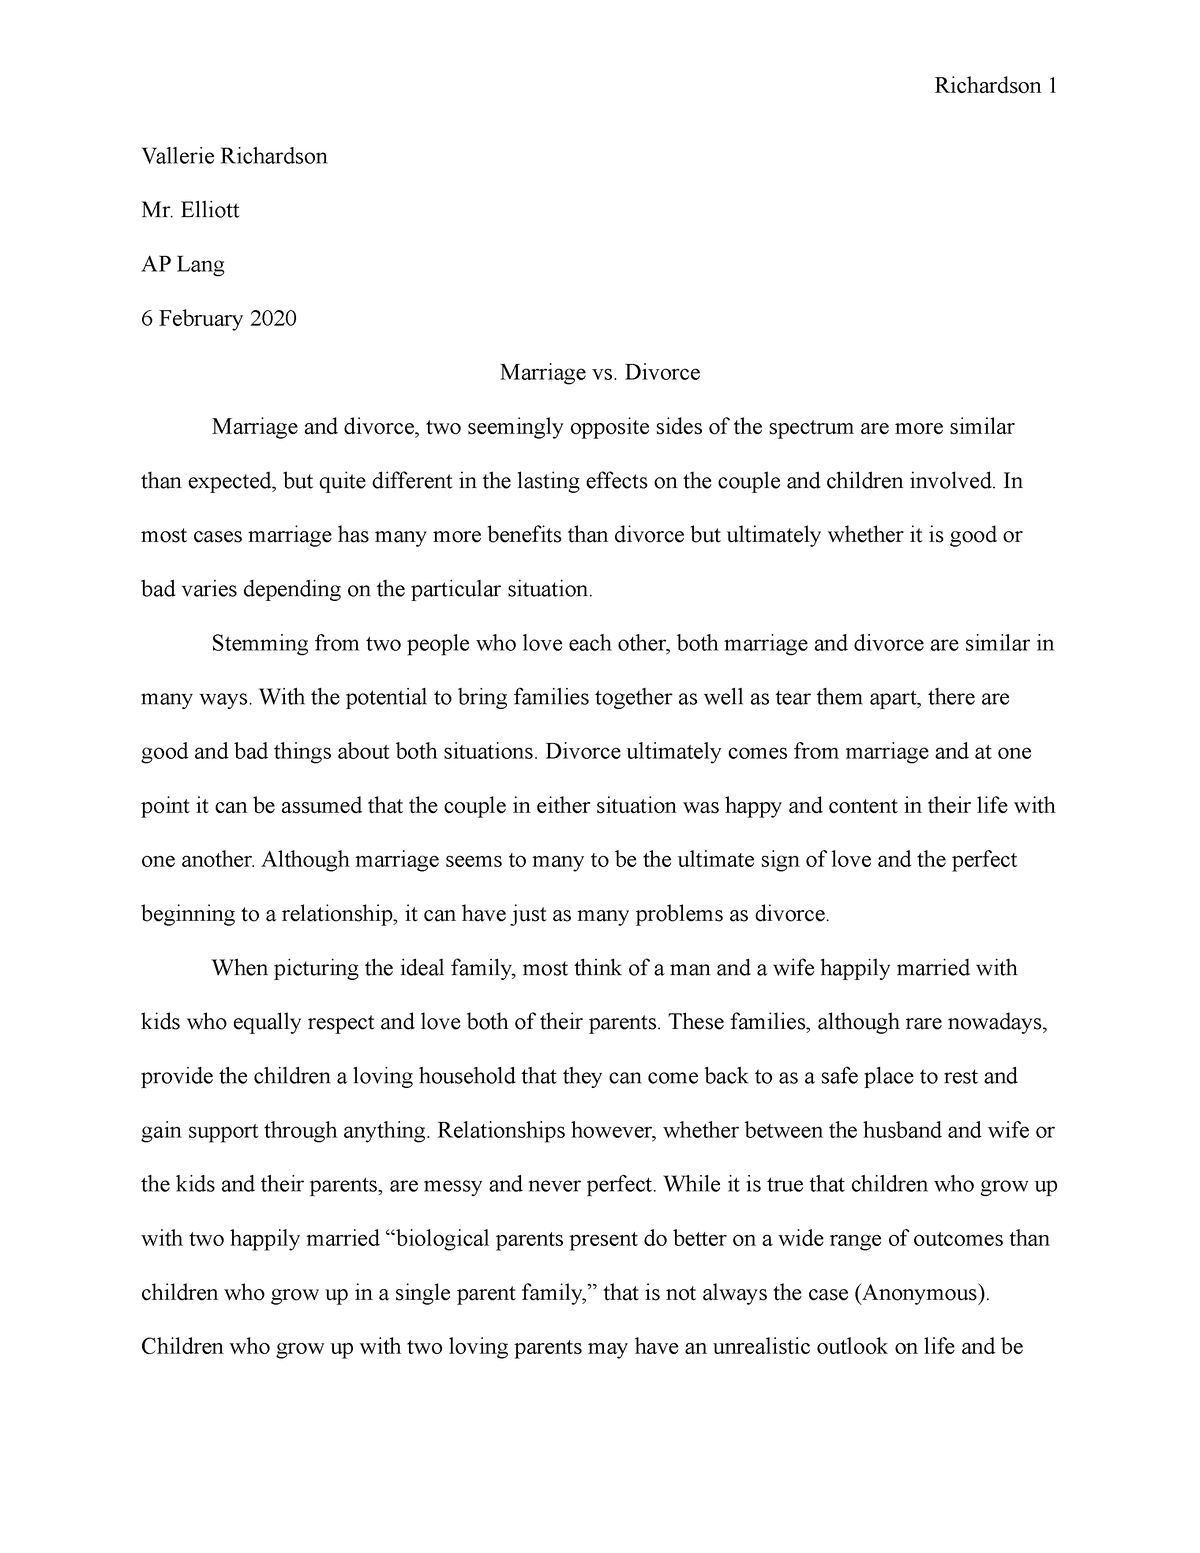 ap lang compare and contrast essay